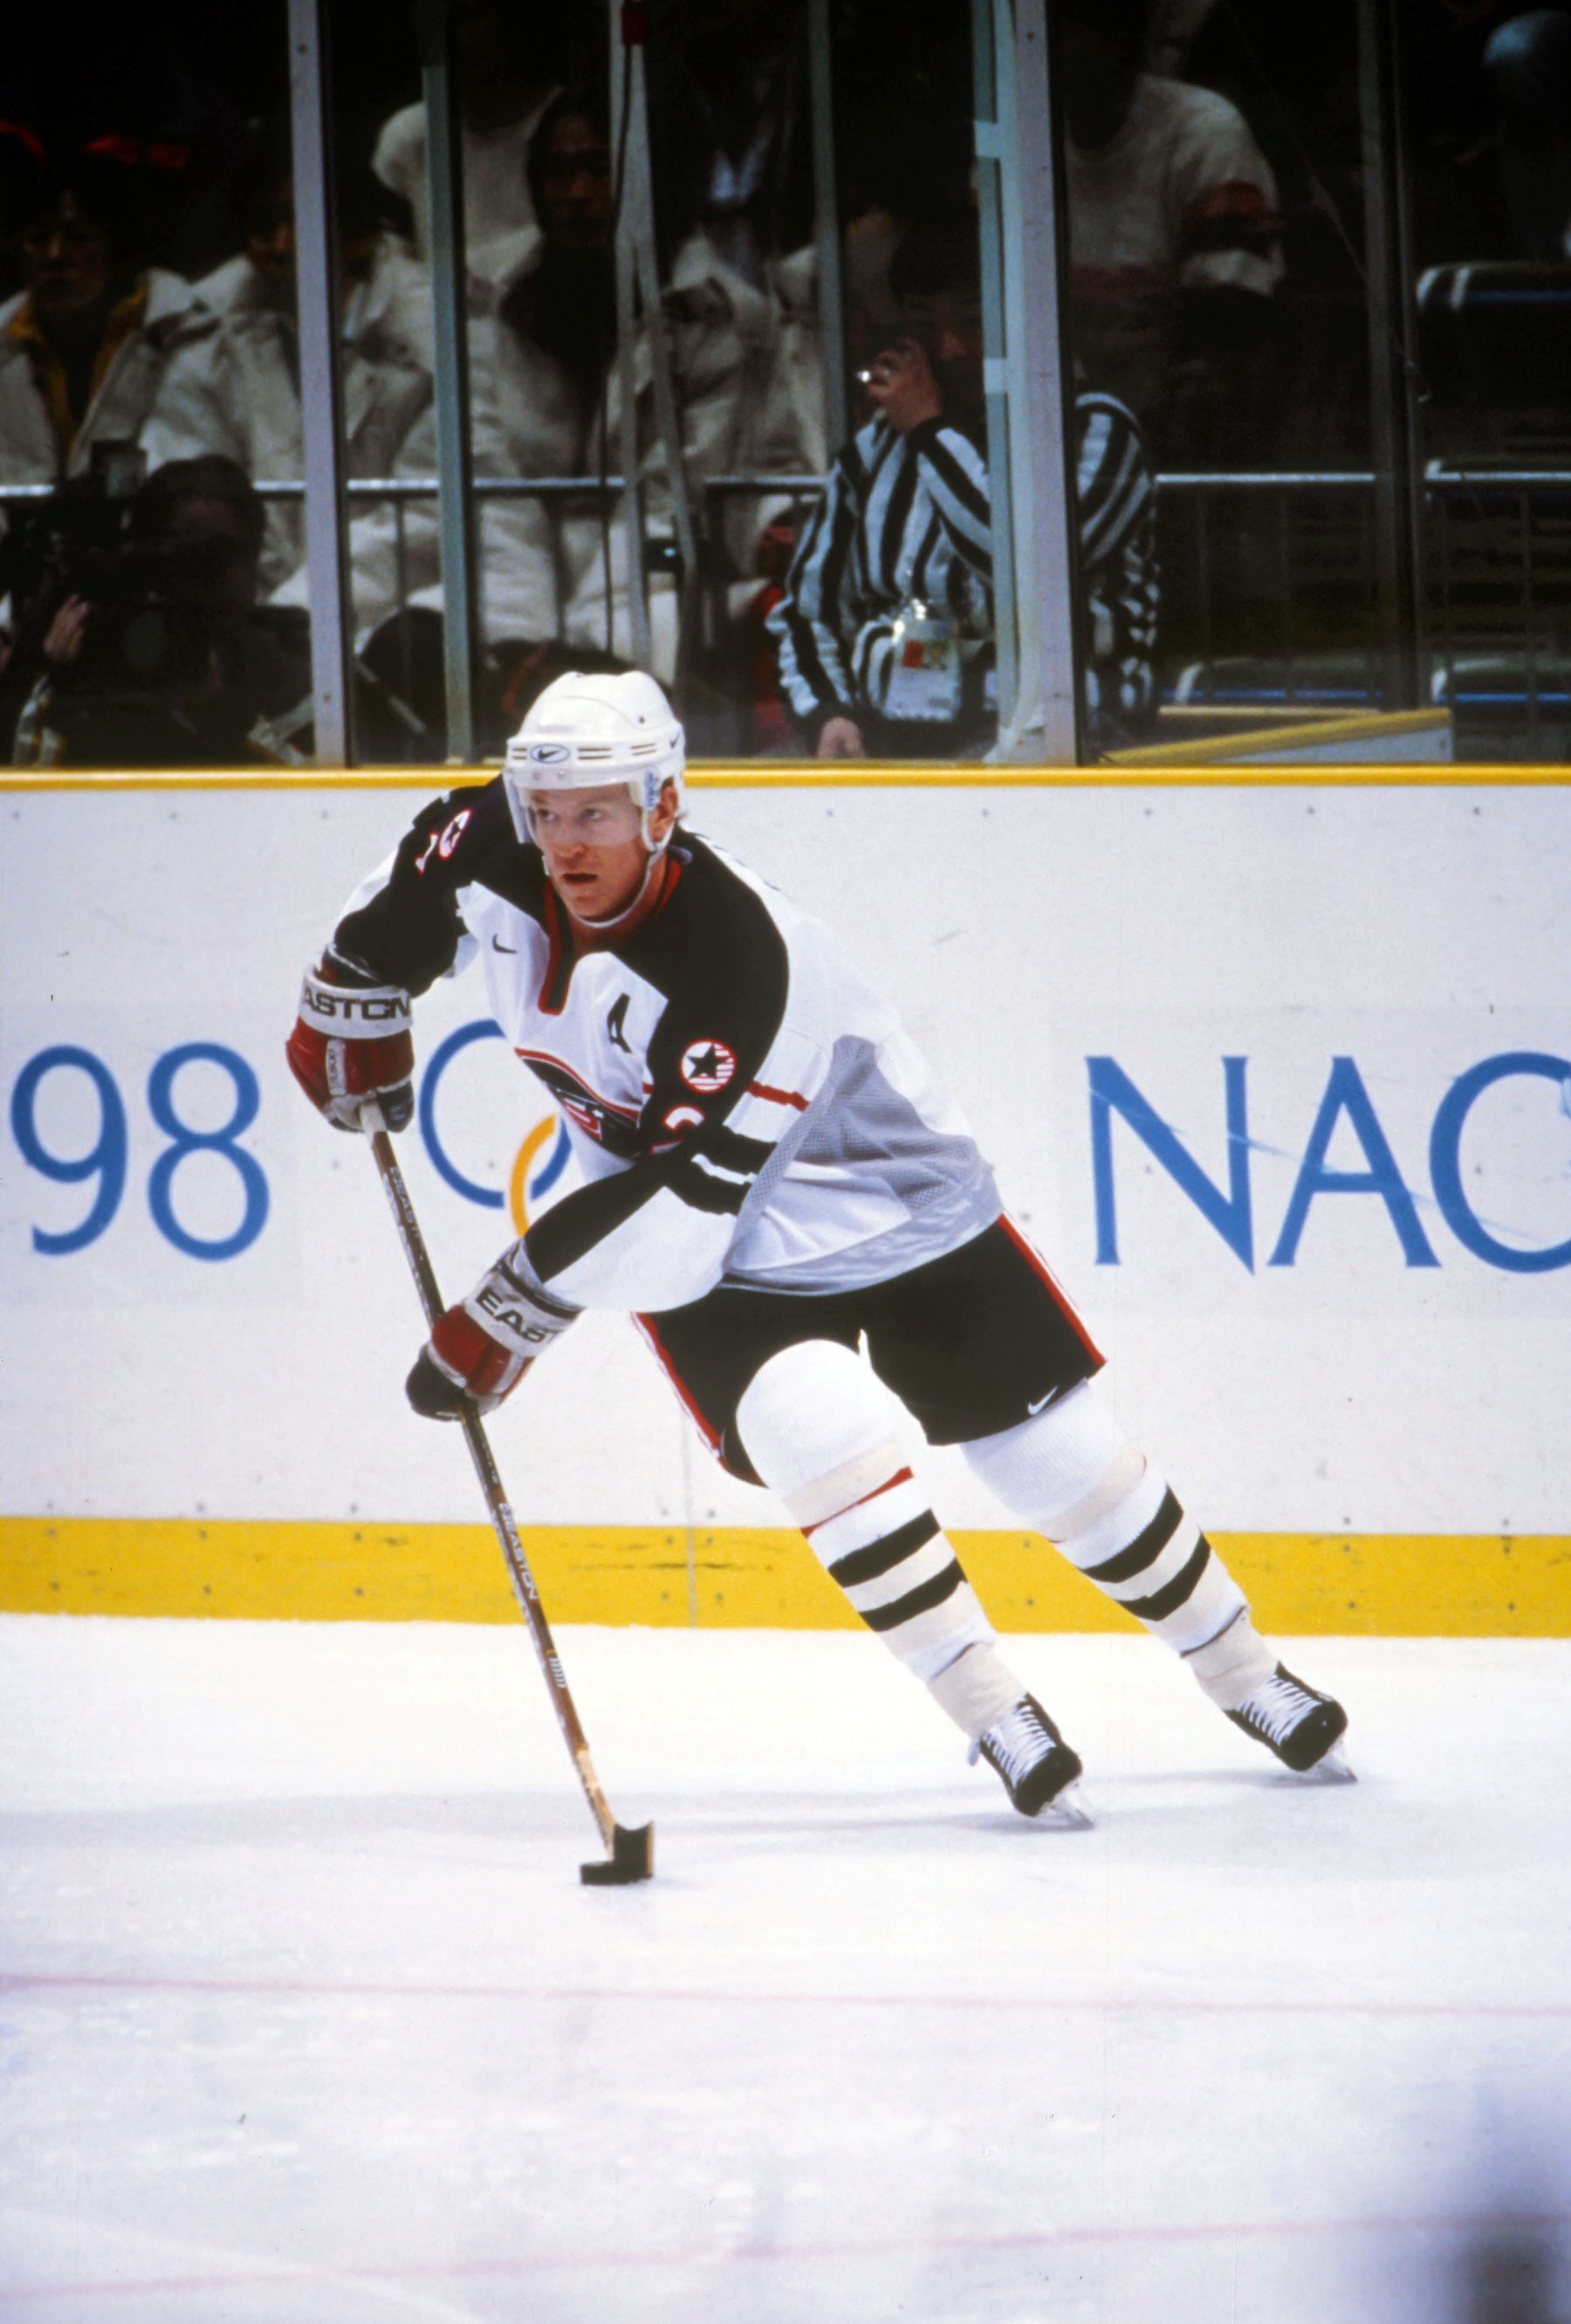 Paul Coffey - Official Website of Professional Hockey Player